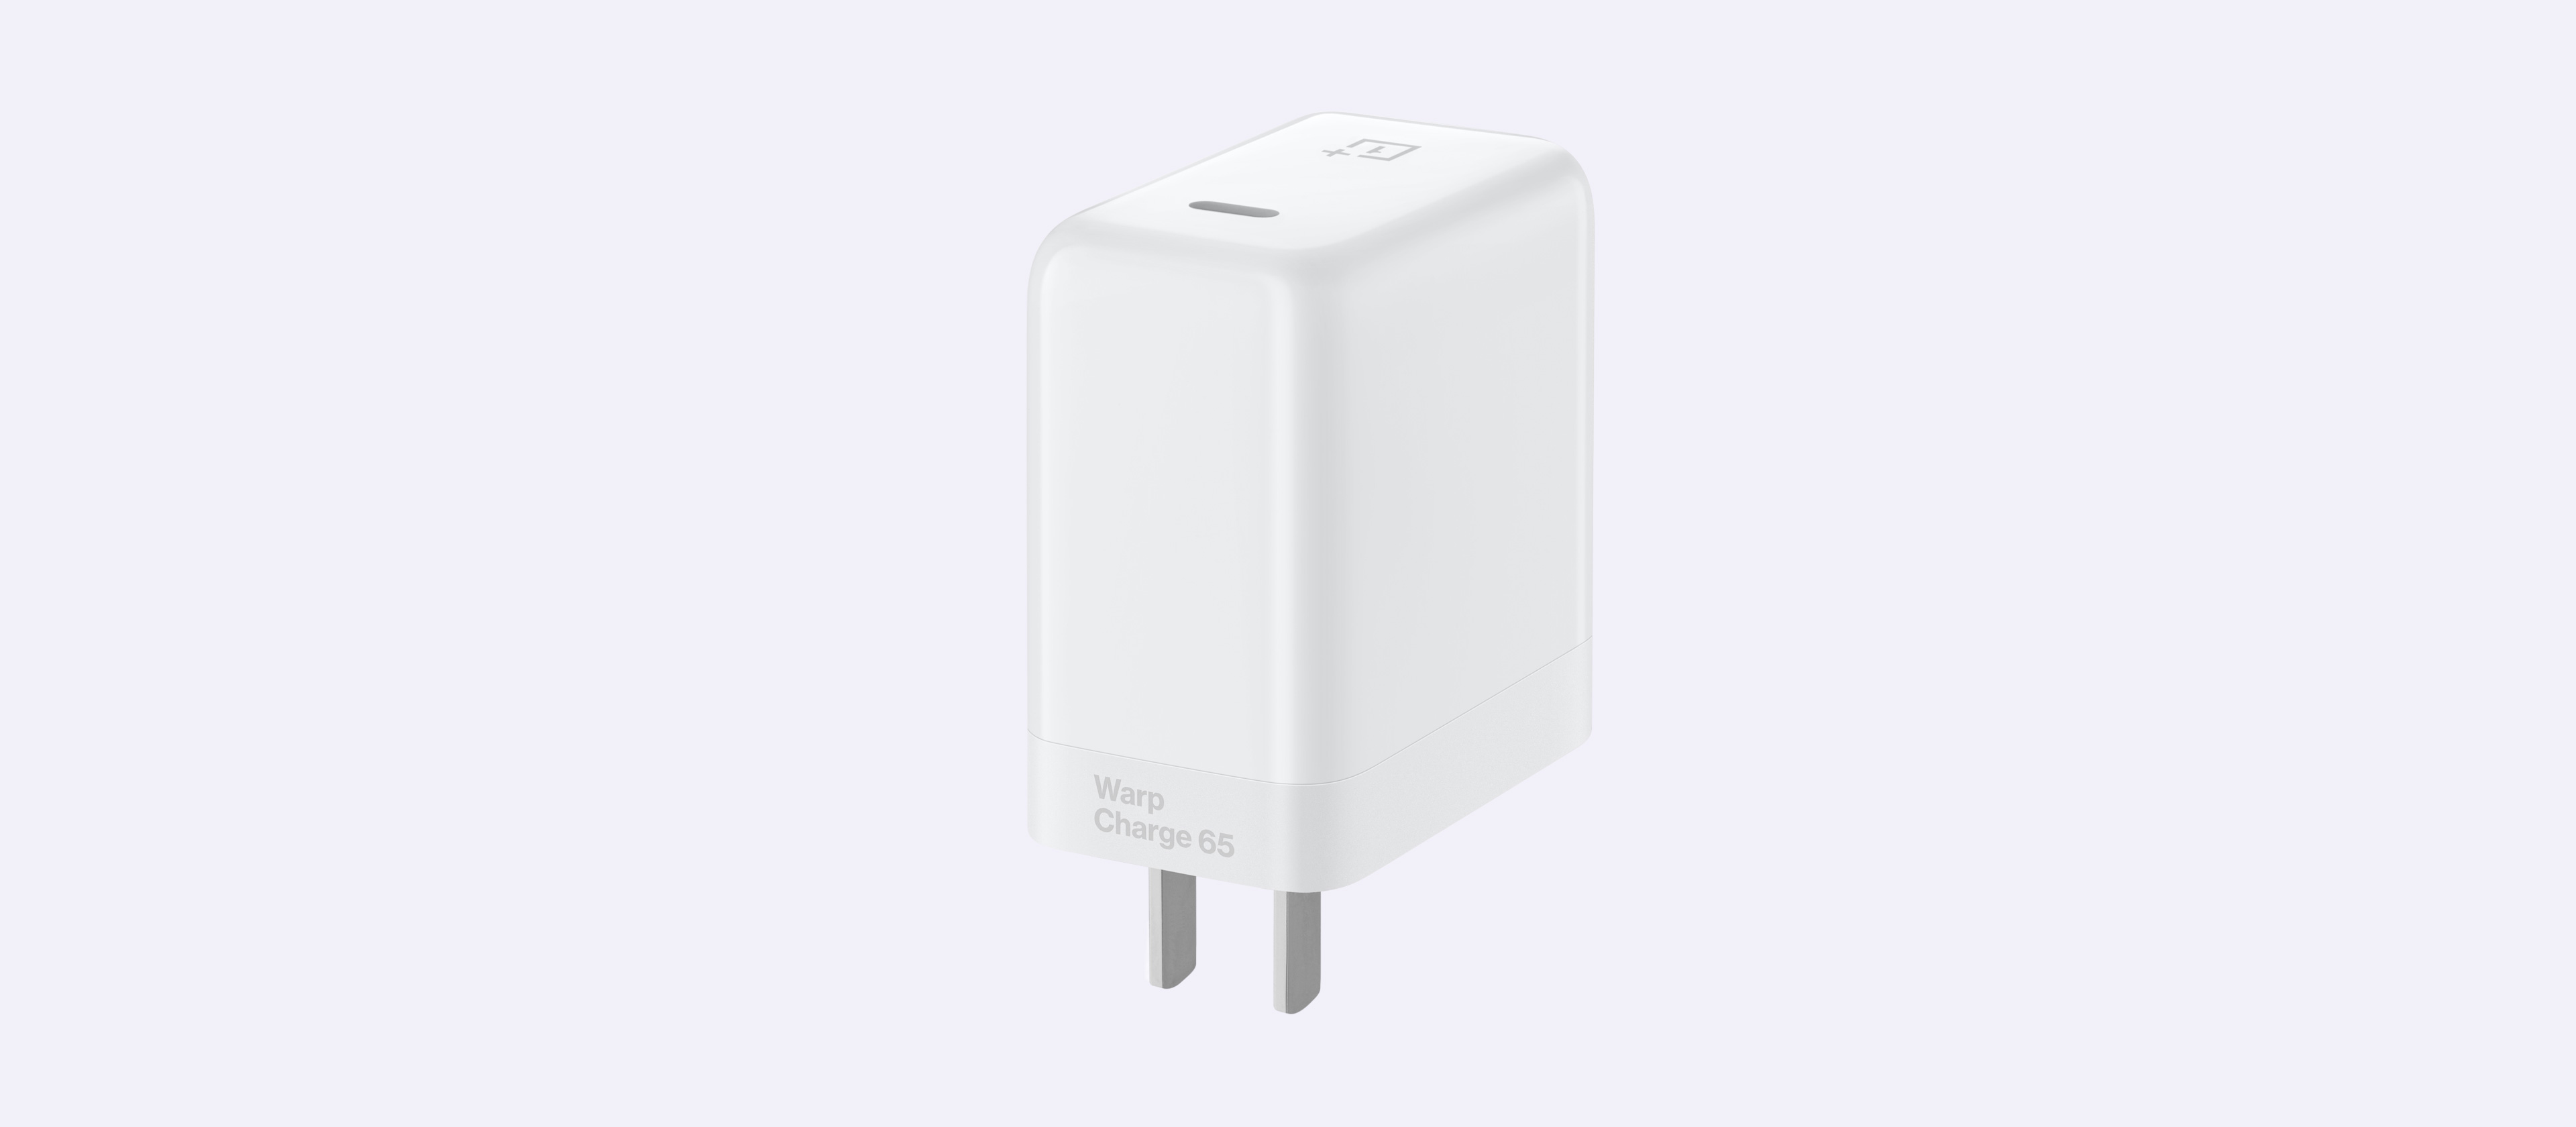 OnePlus Warp Charge 65 Power Adapter with Cable 